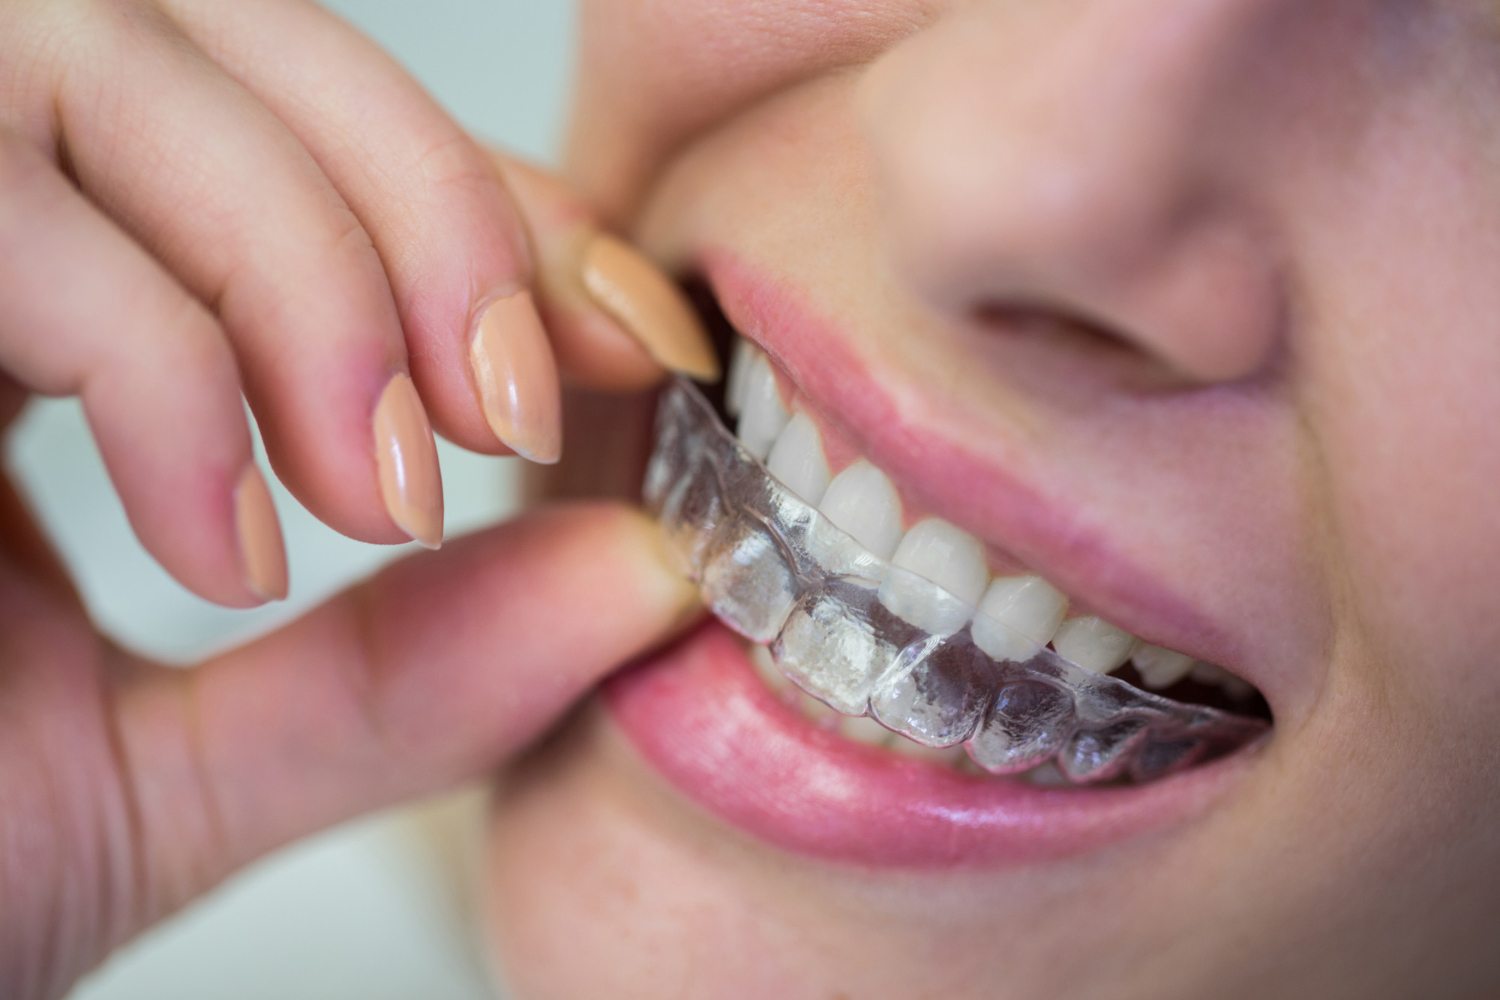 Does Your Invisalign Hurt? Here's How You Can Deal with it.